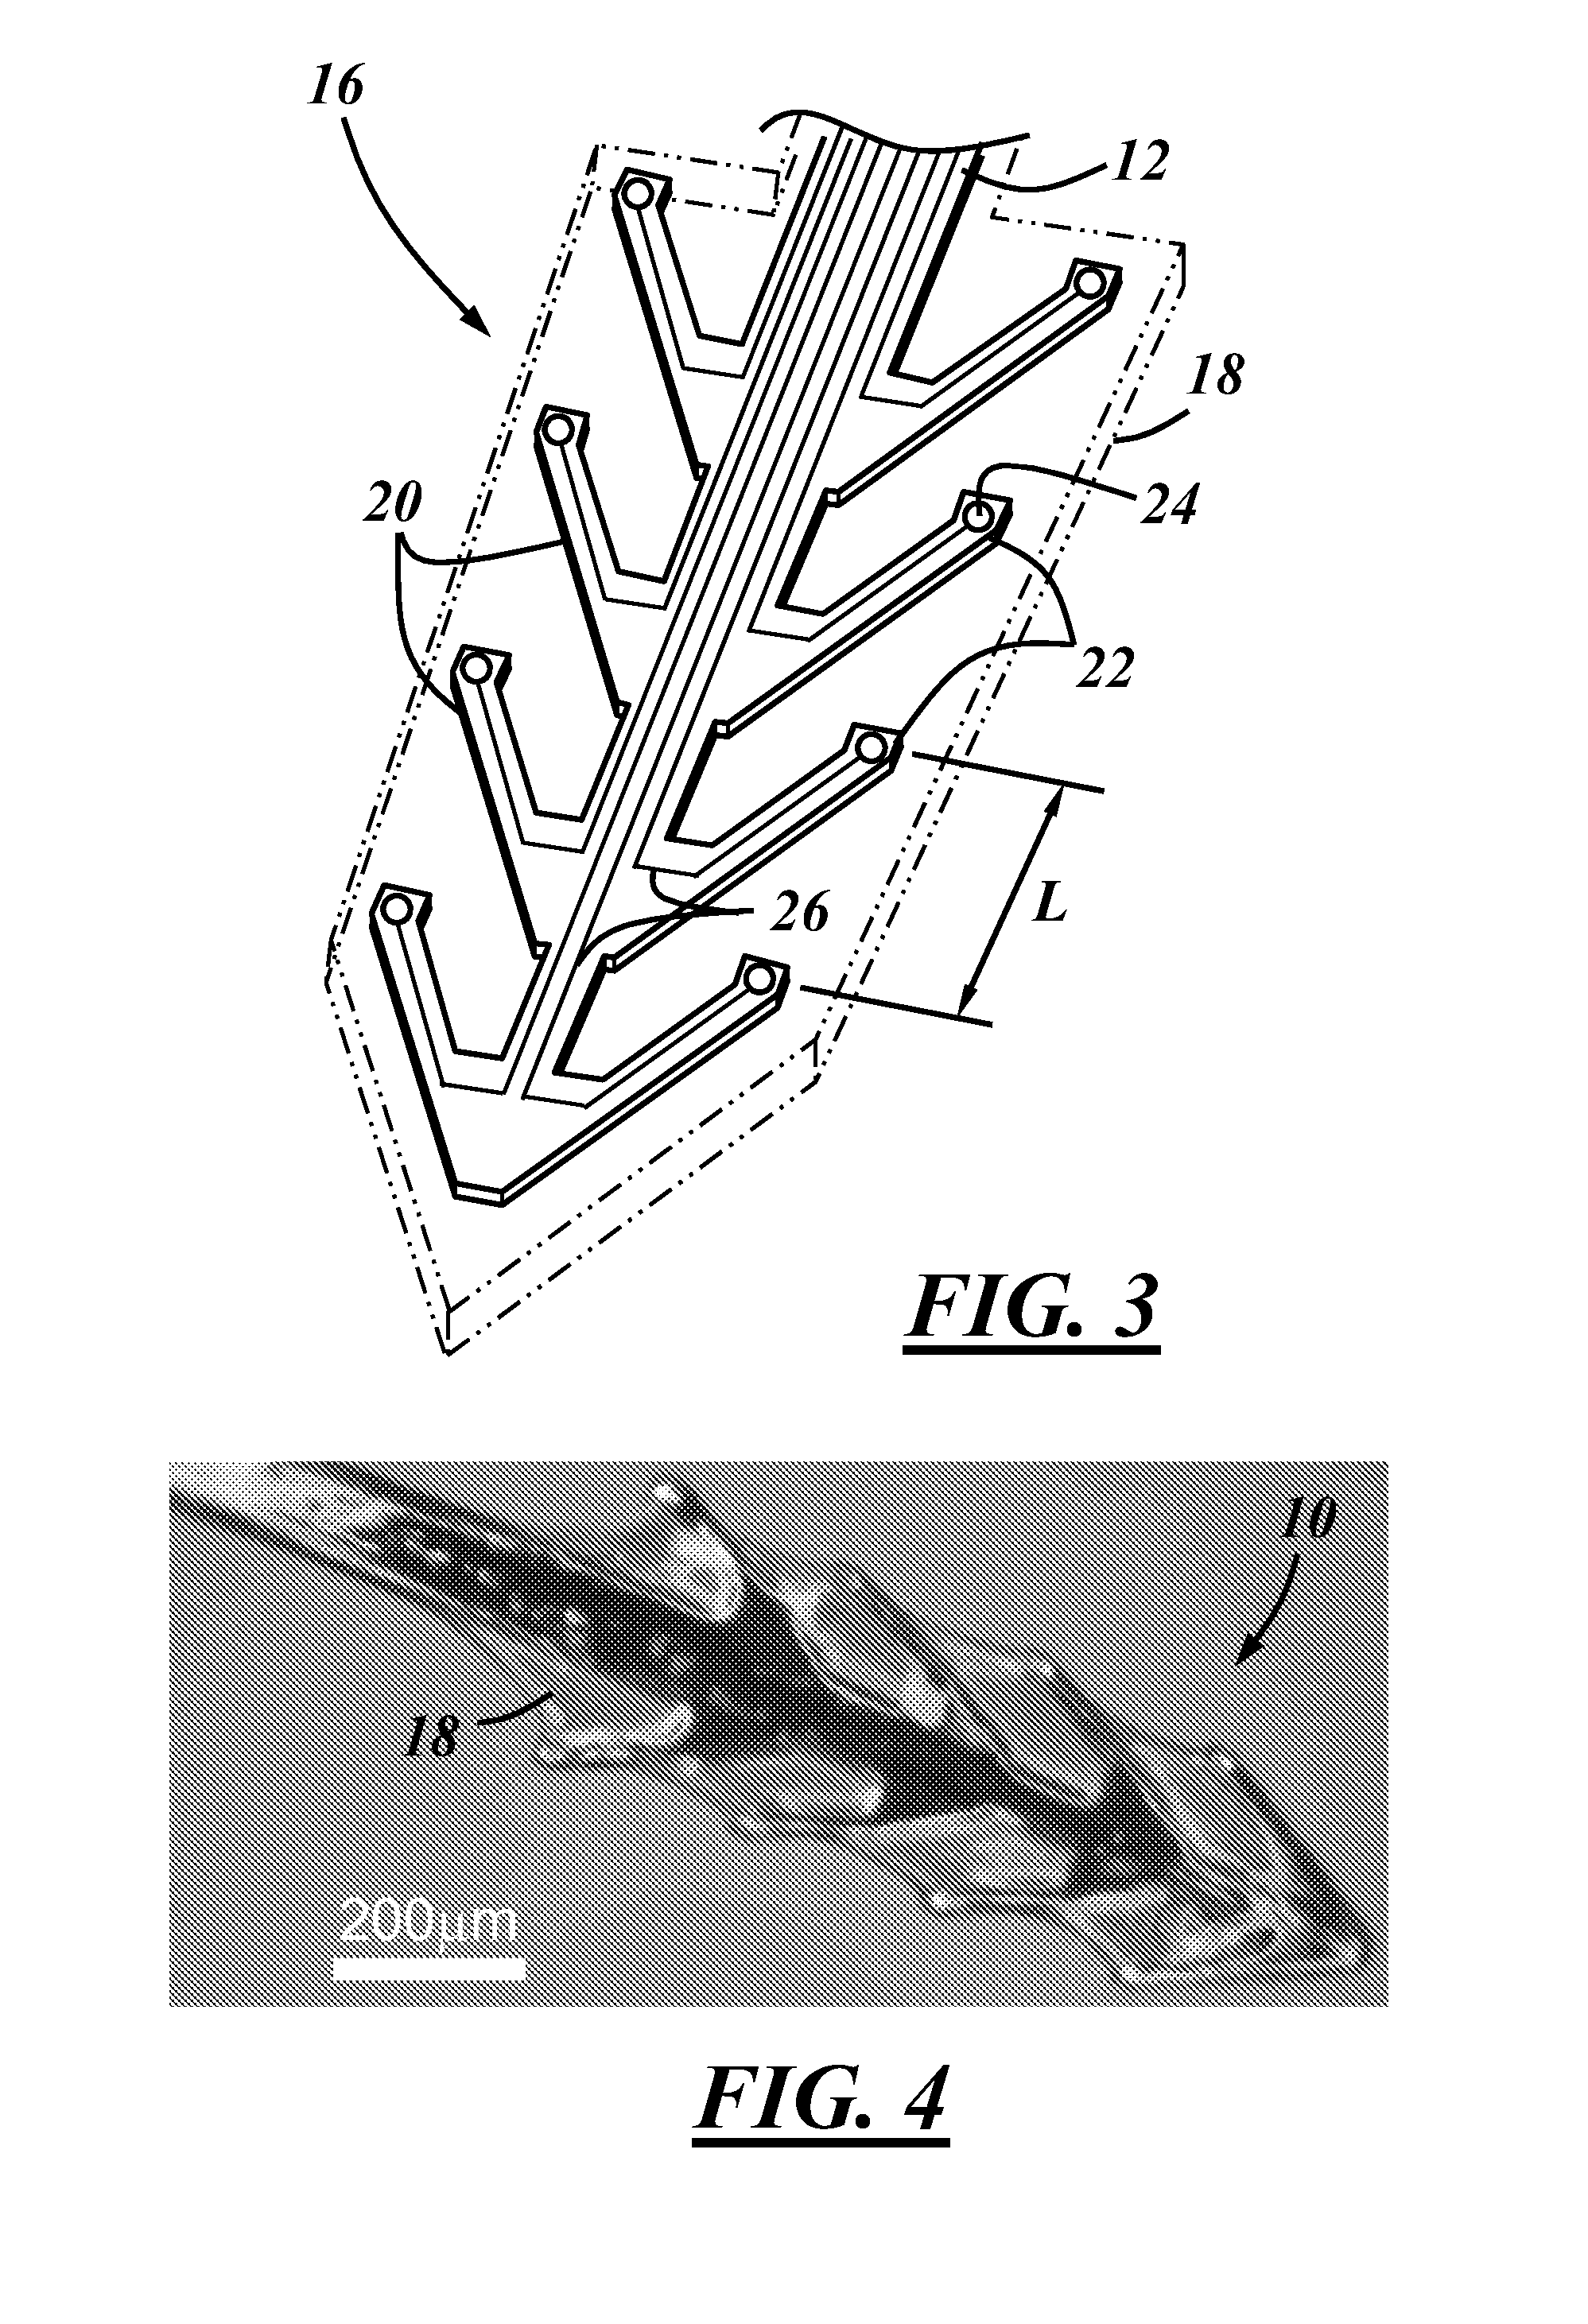 Insertable neural probe with flexible structure